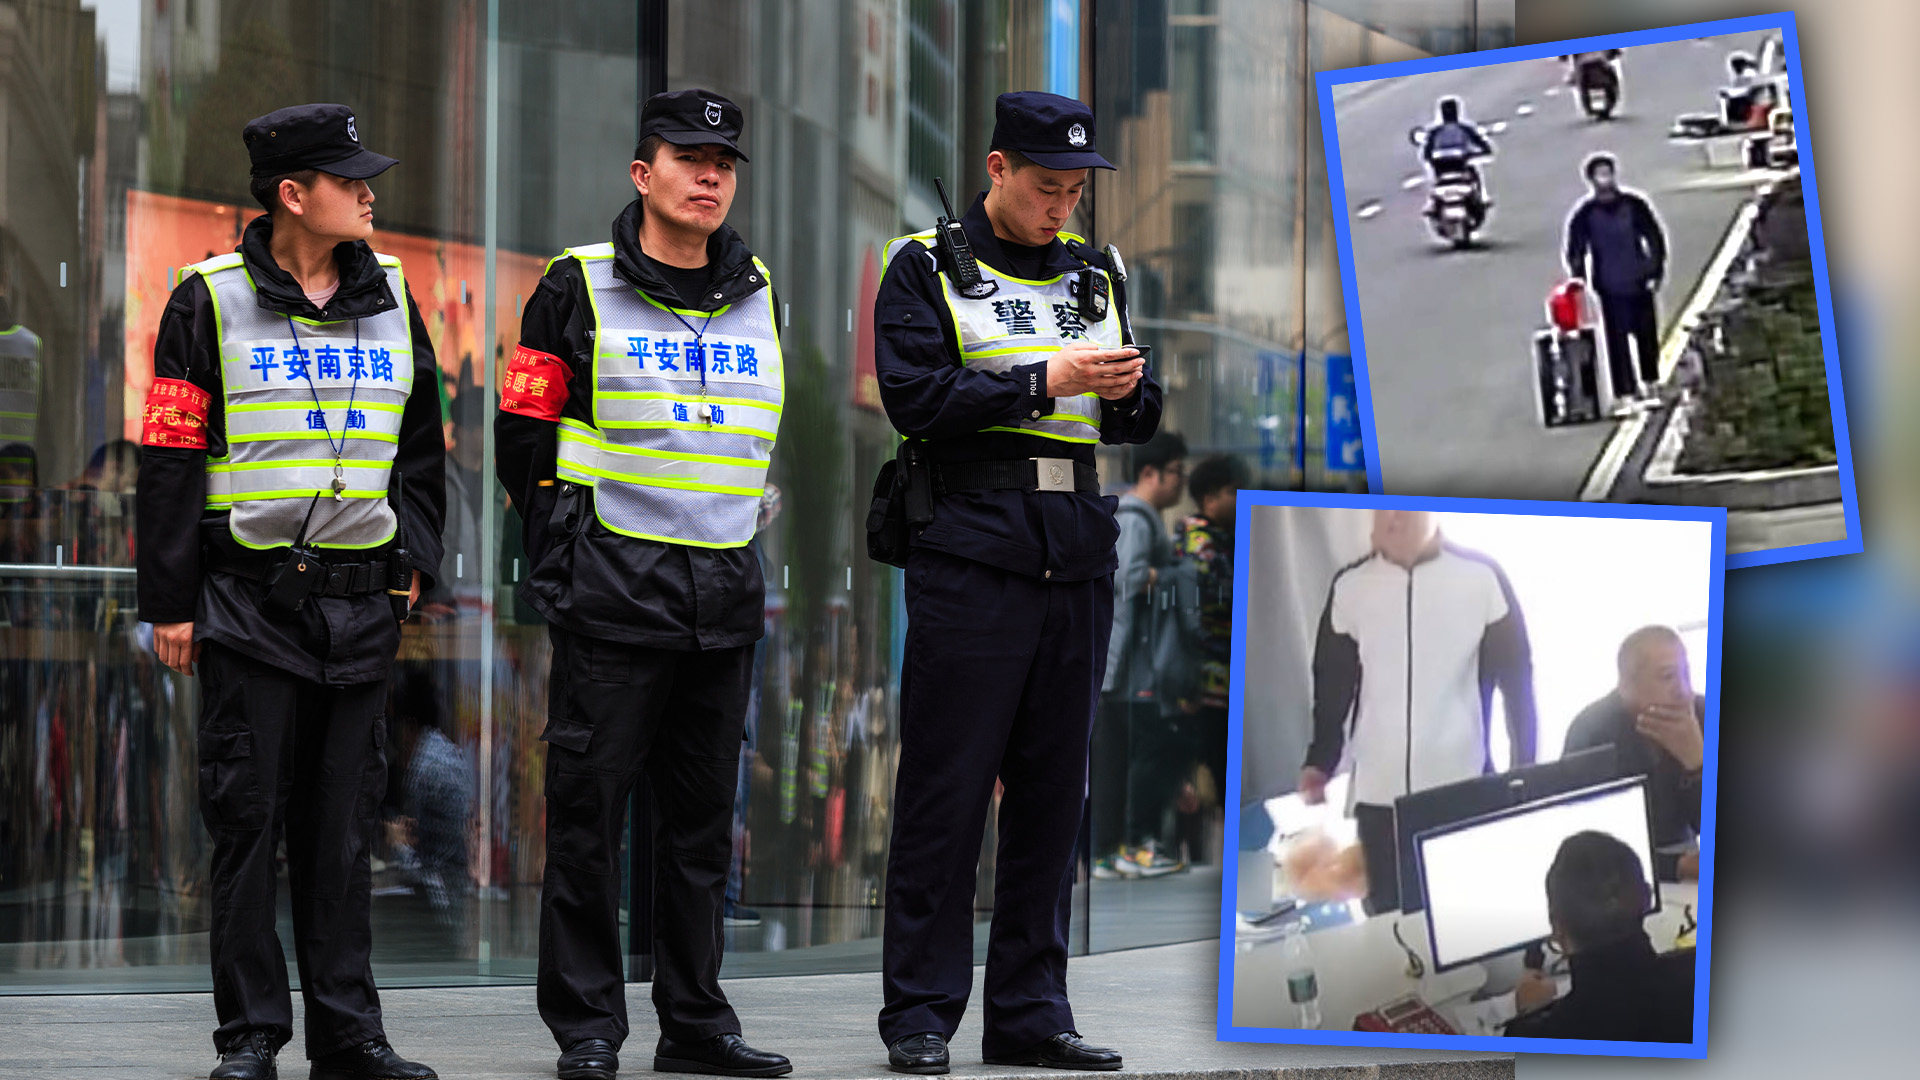 The man went to a local police station for help because he could not contact his friends or family without his phone. Photo: SCMP composite/Shutterstock/Weibo